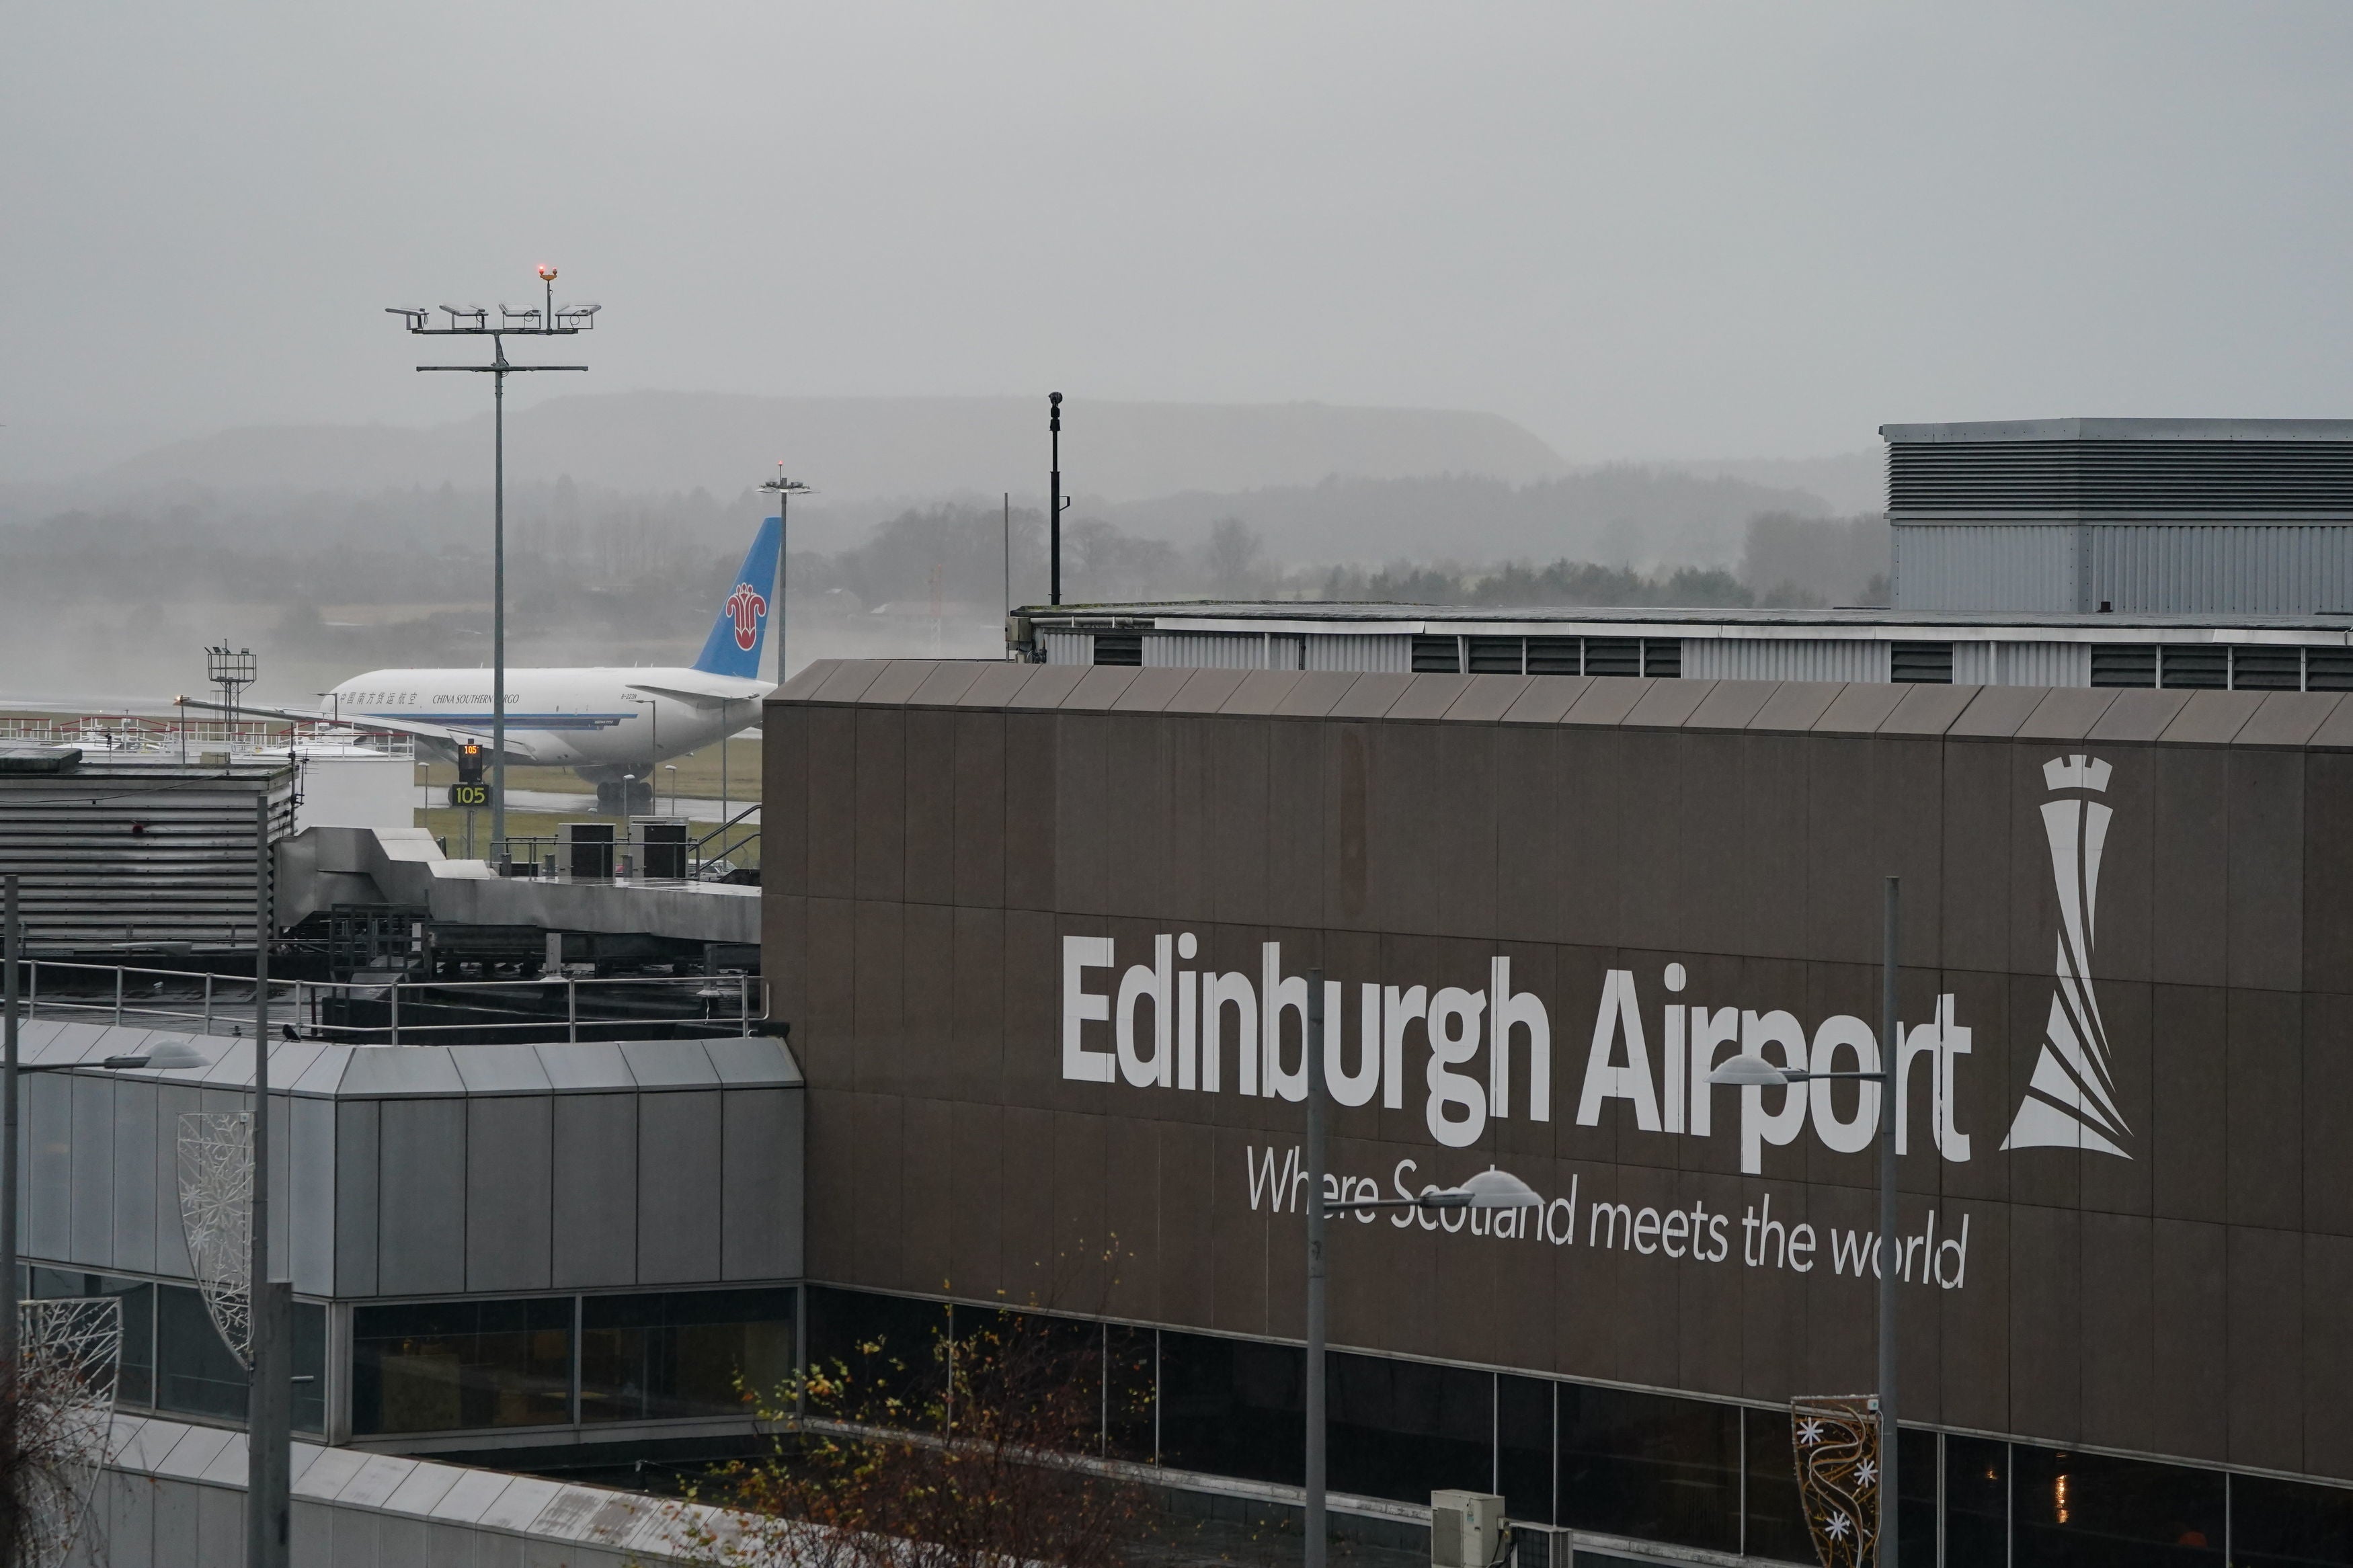 The flight departed from Edinburgh Airport and was due to fly to Ibiza